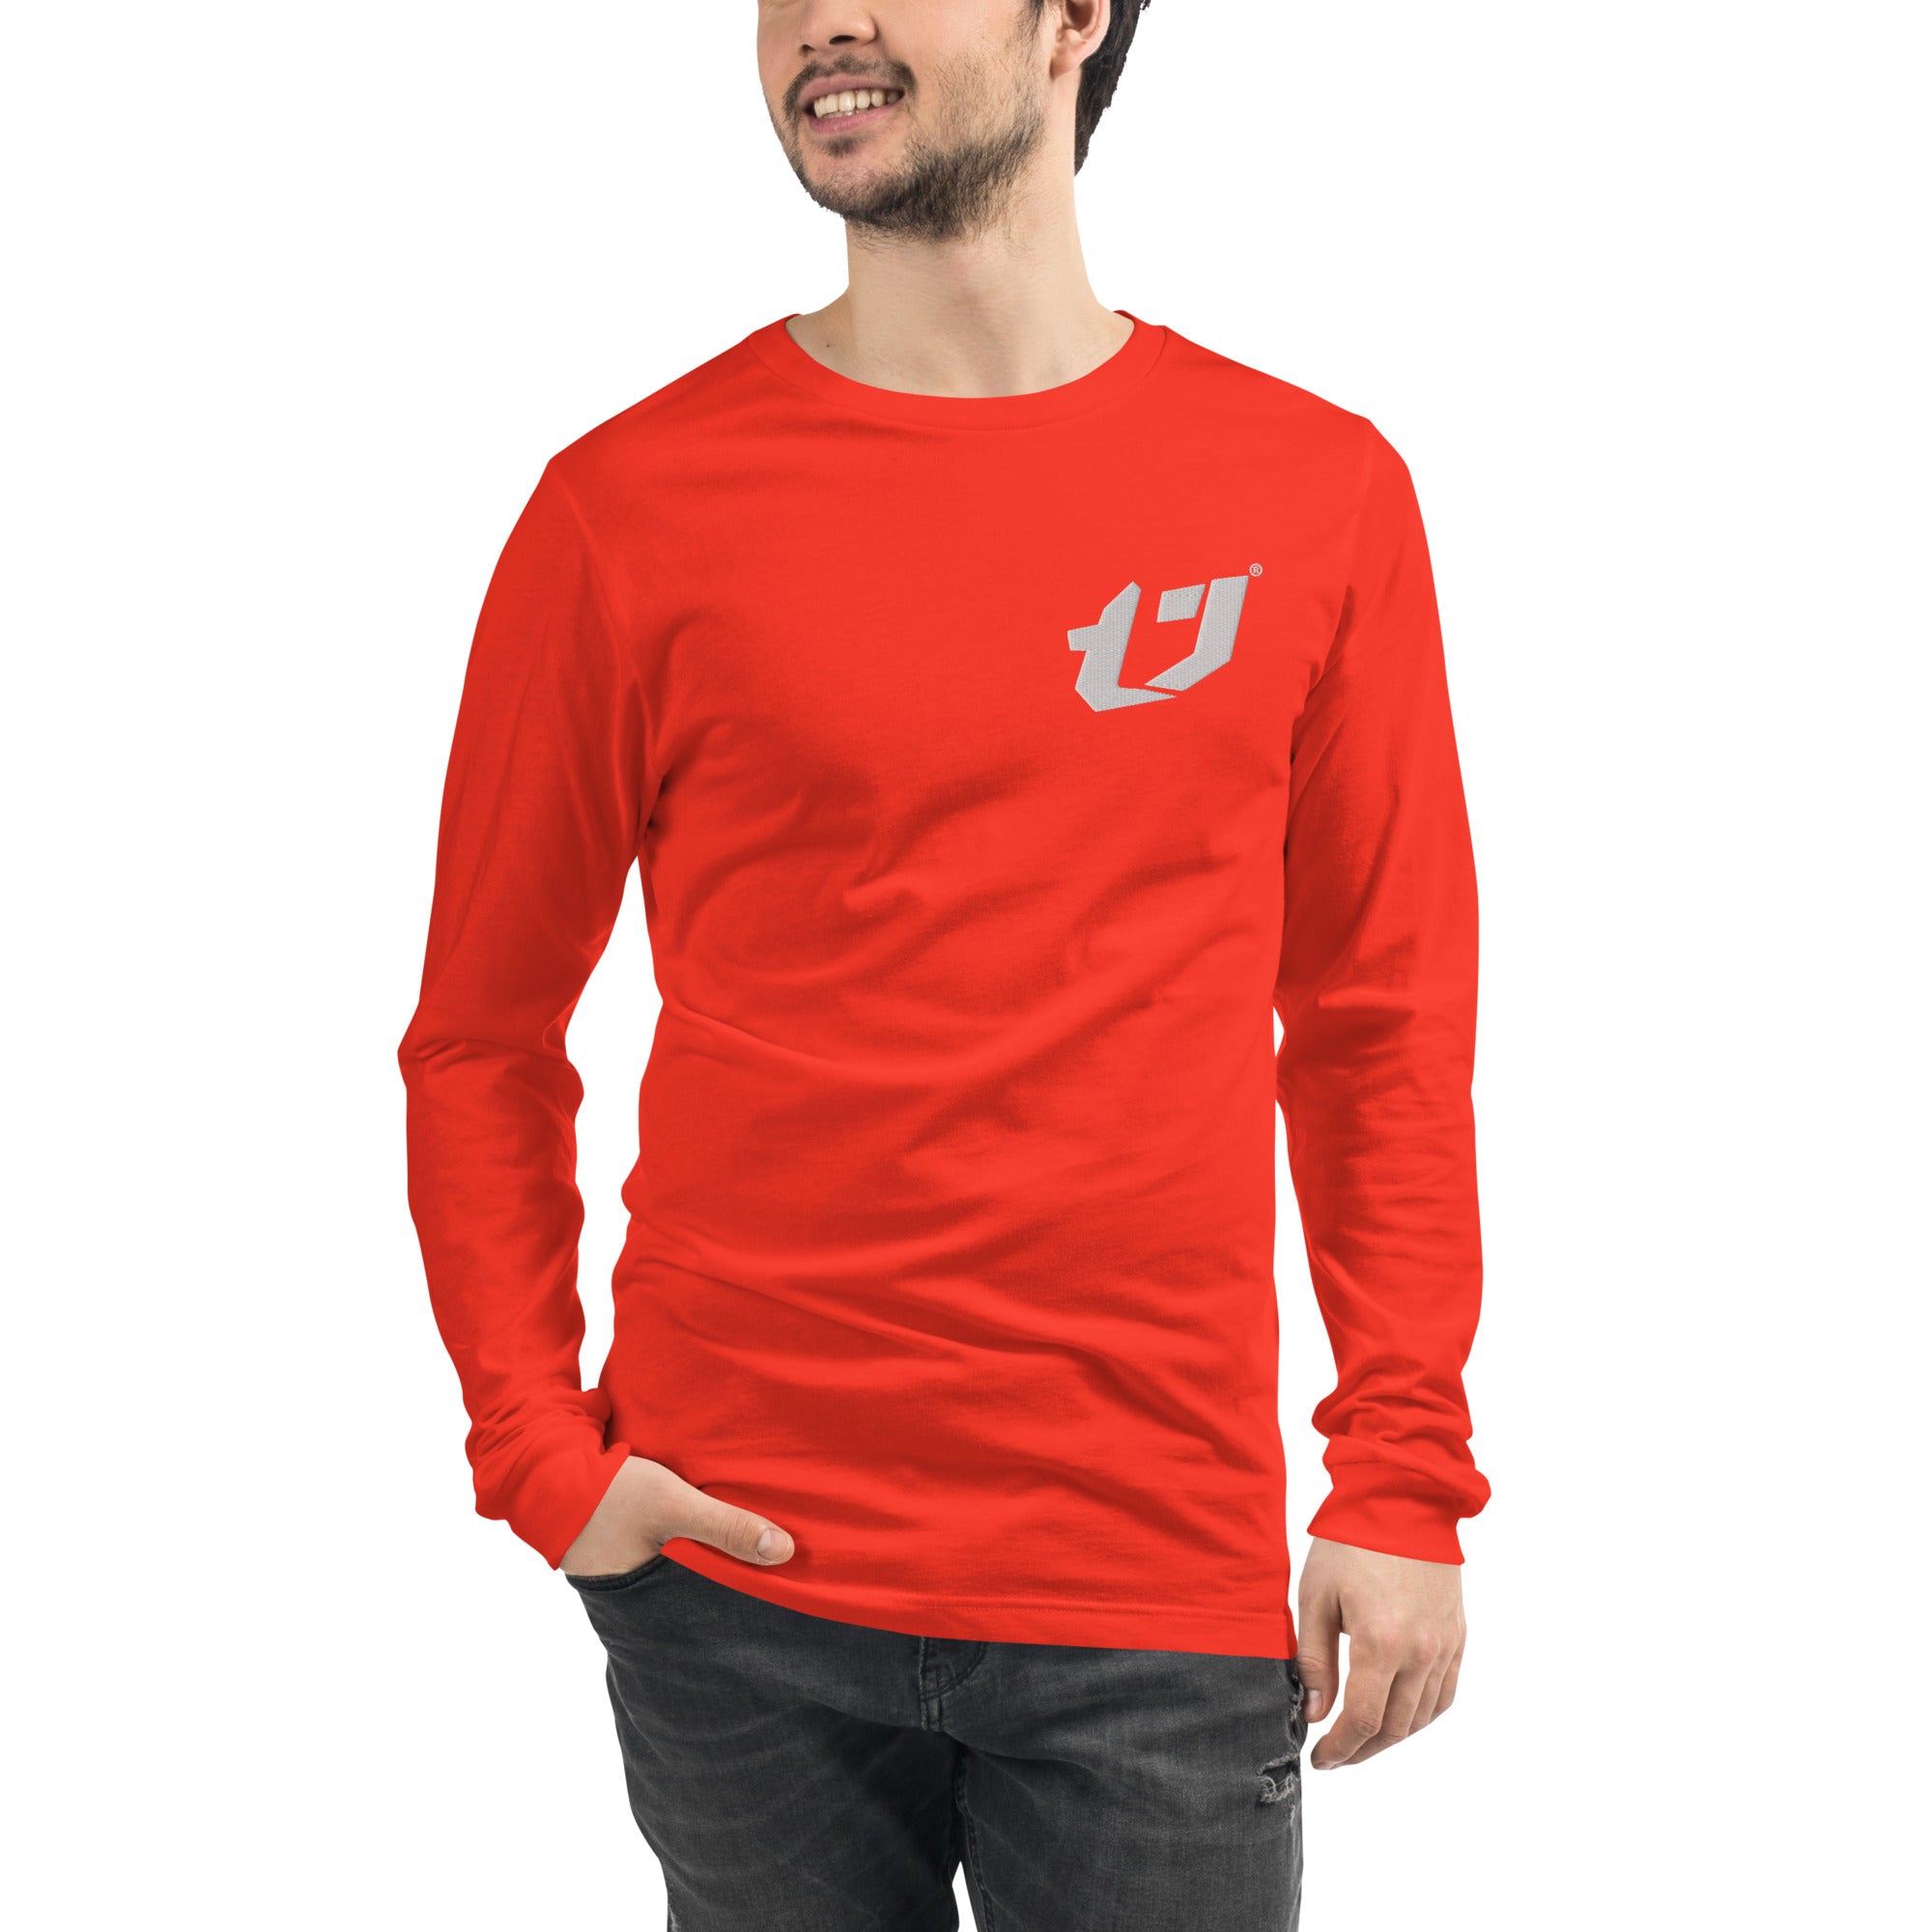 N'Trench Men/Guys Embroidery right centered logo Long Sleeve Tee